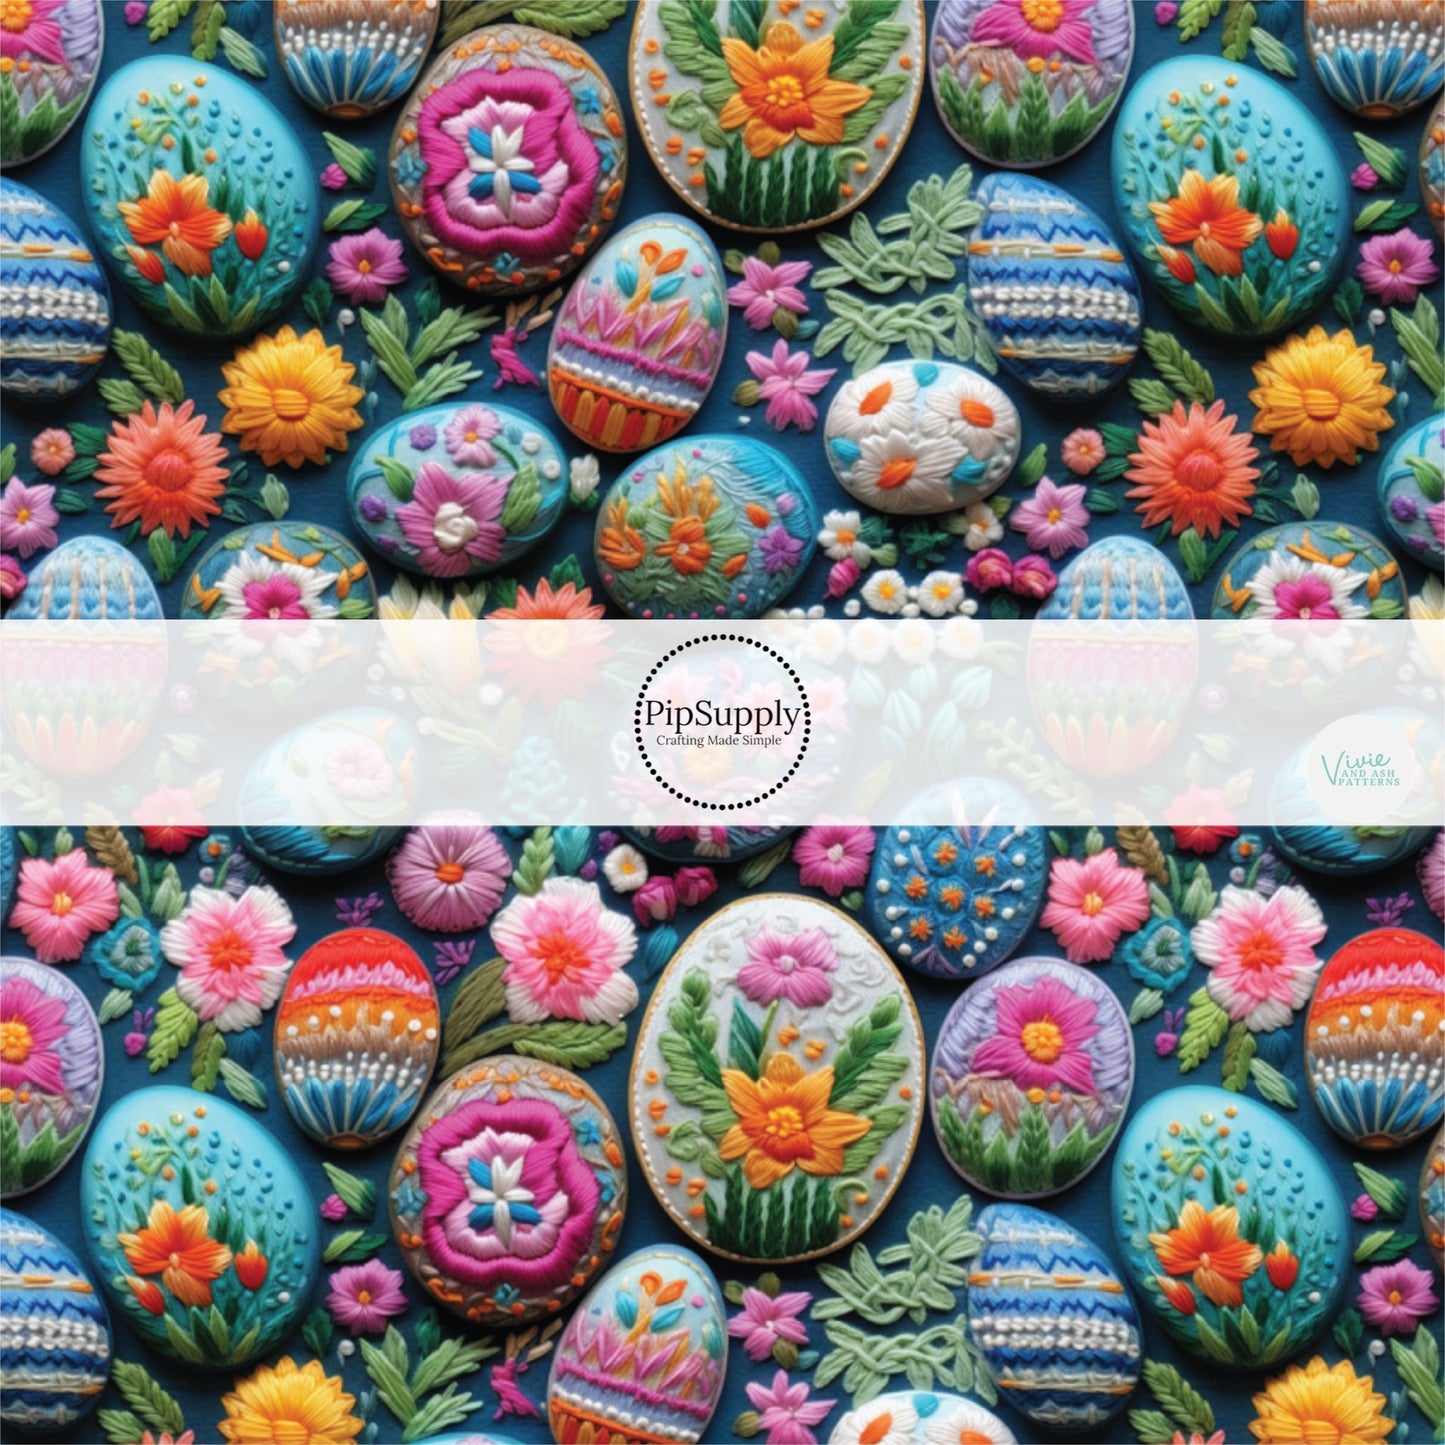 Spring Colored Faux Embroidered Eggs Fabric by the Yard.